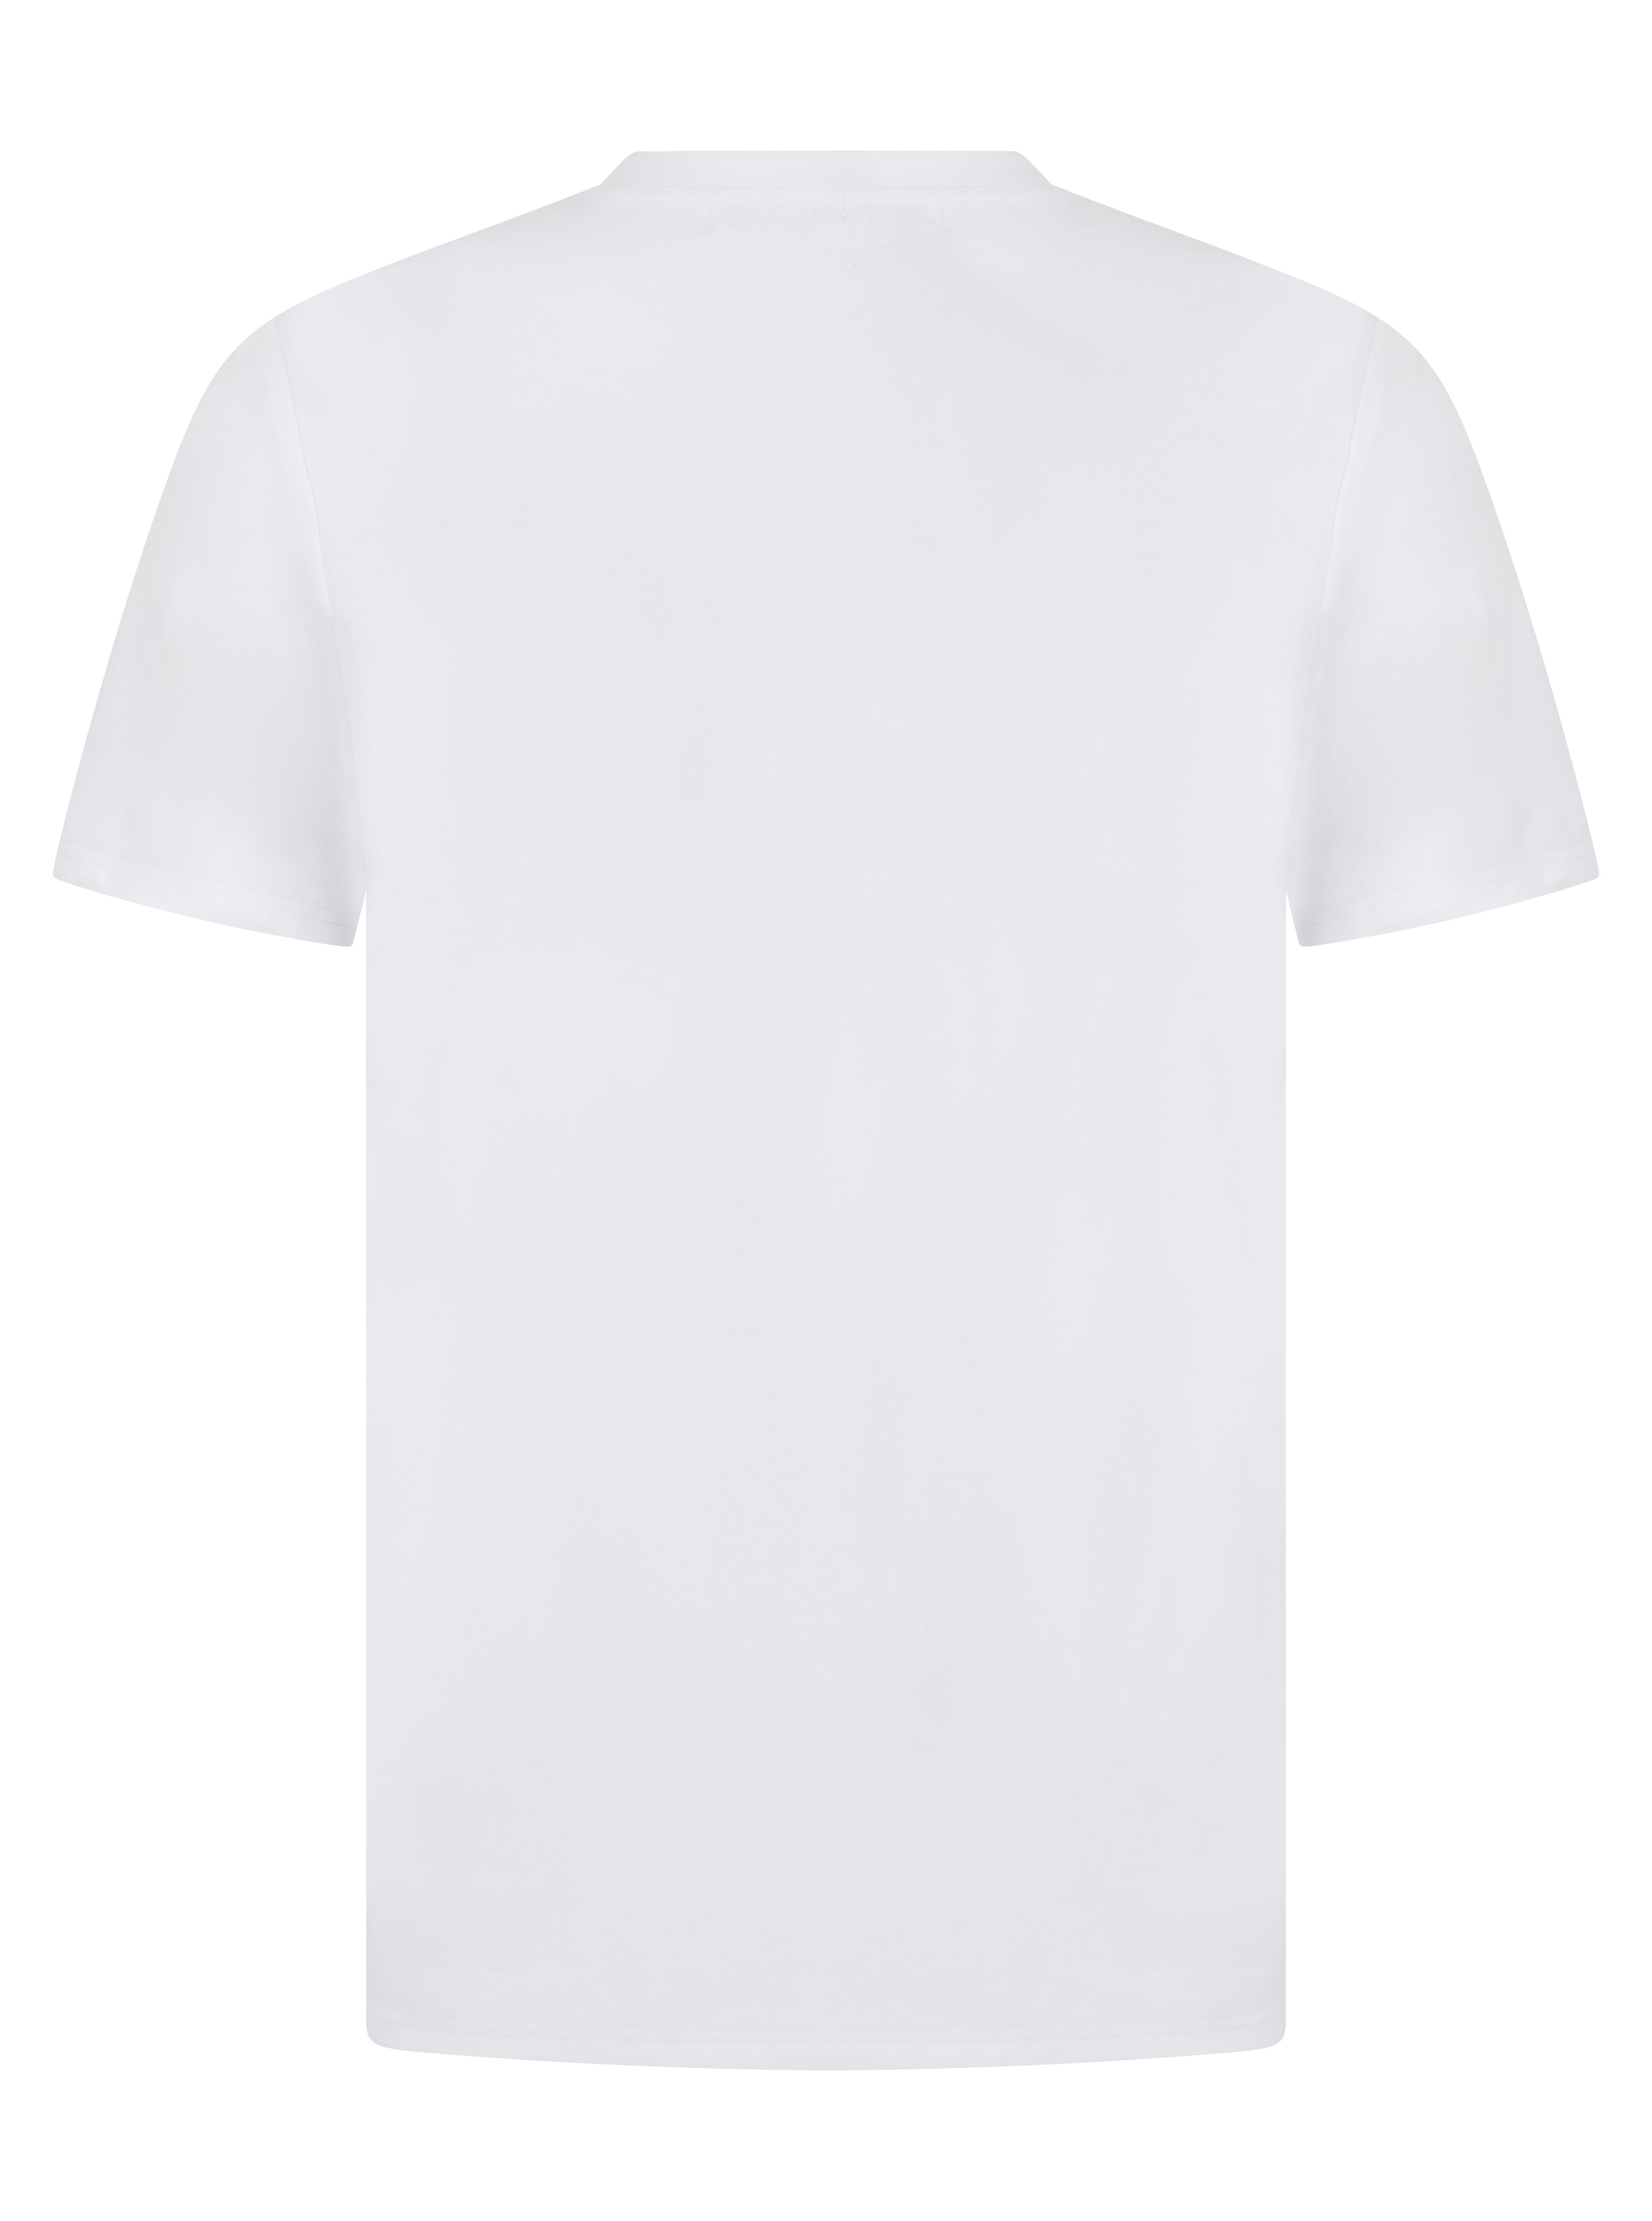 Load image into Gallery viewer, Belier Tech Pocket Tee White
